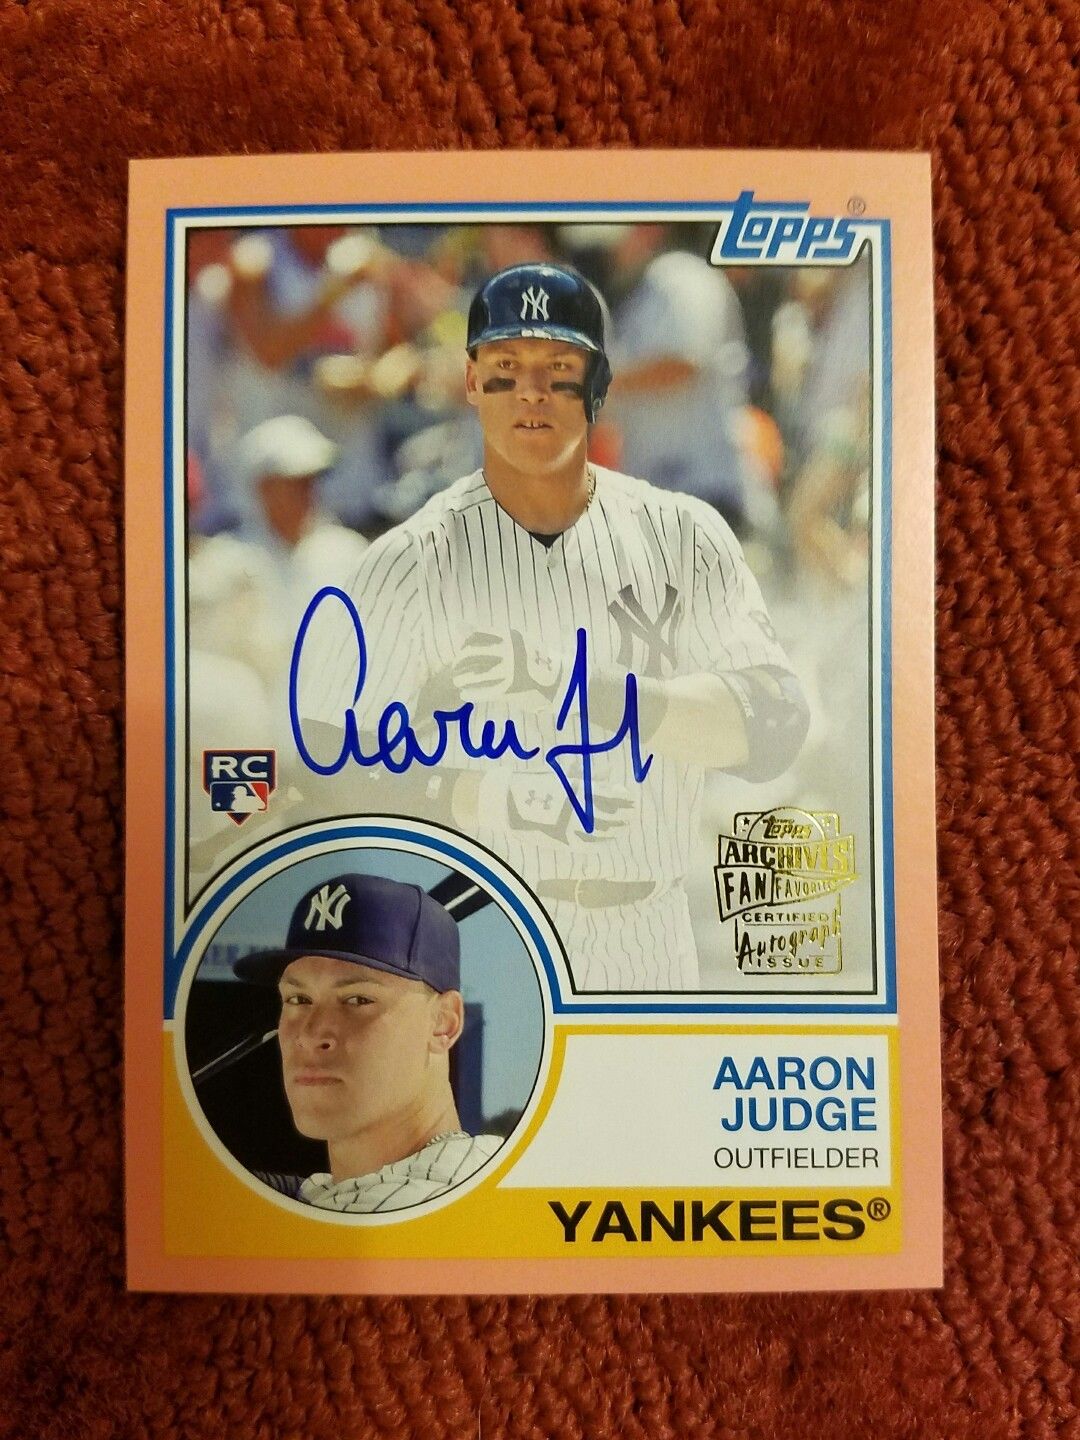 2017 Topps Archives *AARON JUDGE* Auto #'d 16/150 RC Rookie